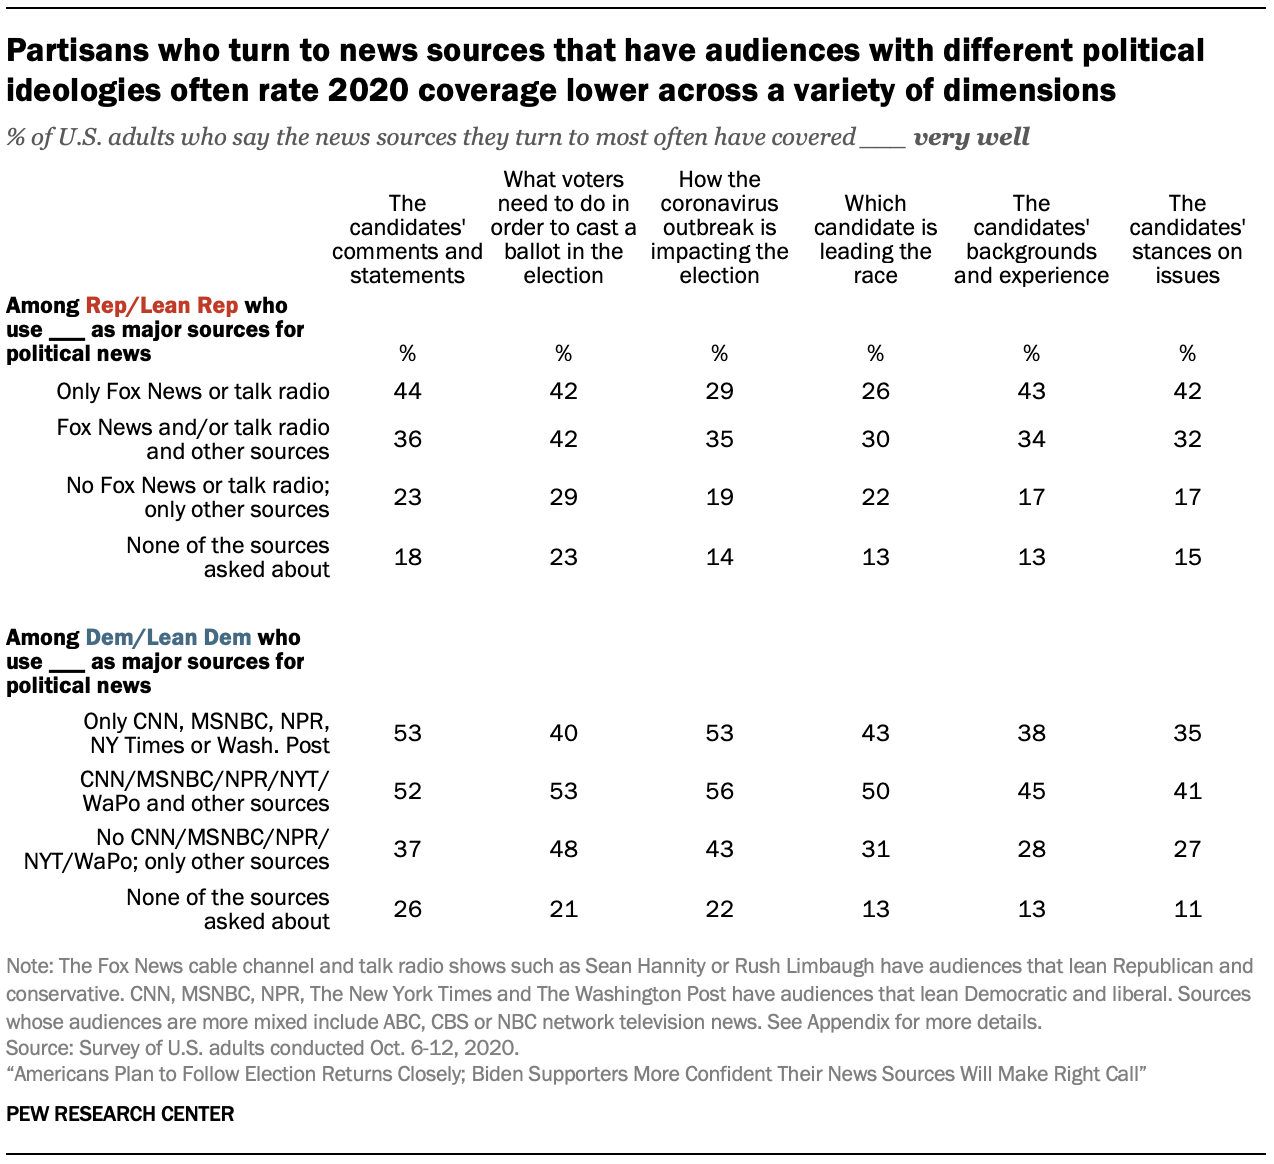 Partisan voters who turn to news sources that have audiences with different political ideologies often rate 2020 coverage lower across a variety of dimensions